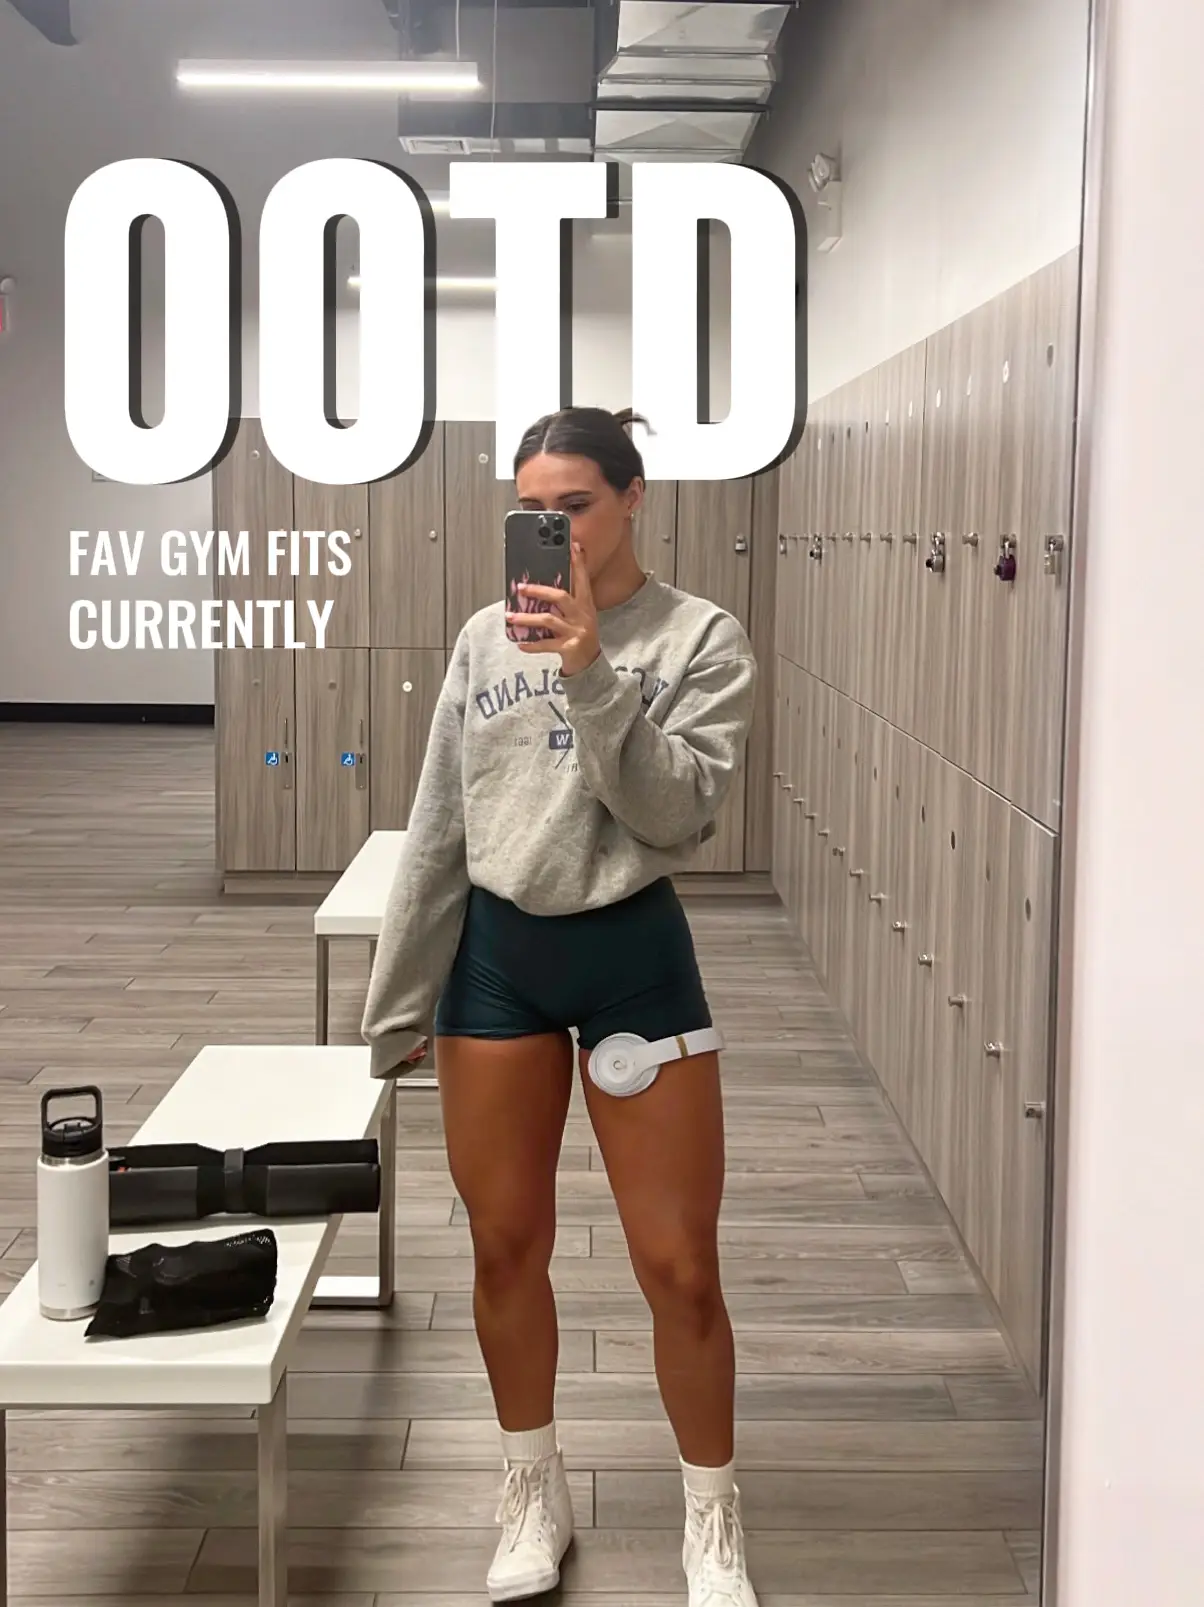 OOTD - CURRENT FAV GYM FITS 🫶🏼, Gallery posted by Giovanna